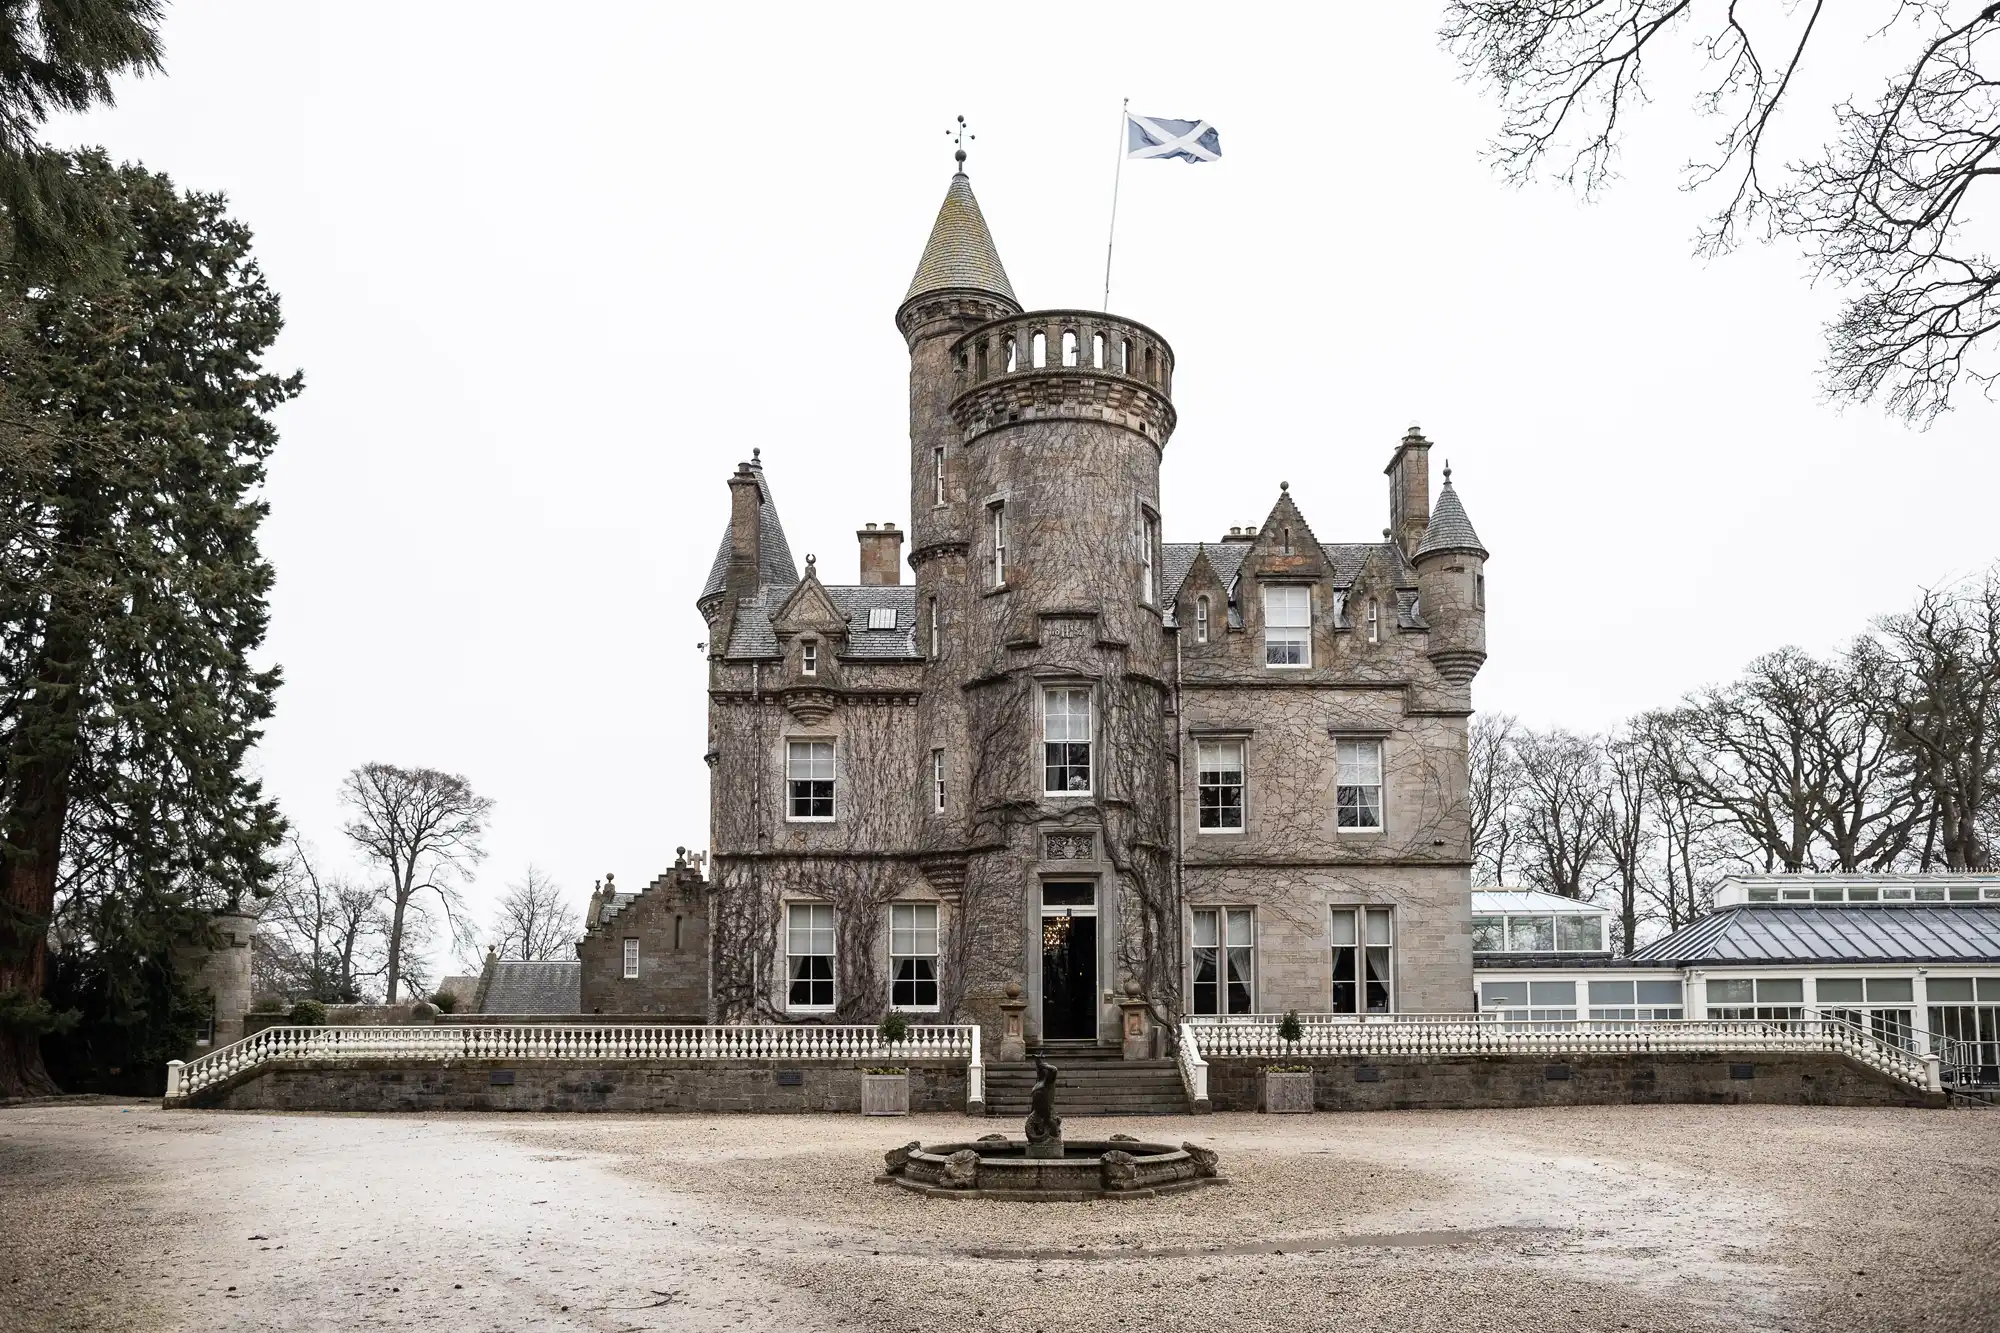 A historic stone castle with multiple turrets and a flag flying atop the central tower. The building is surrounded by bare trees and a fenced courtyard with a small fountain.